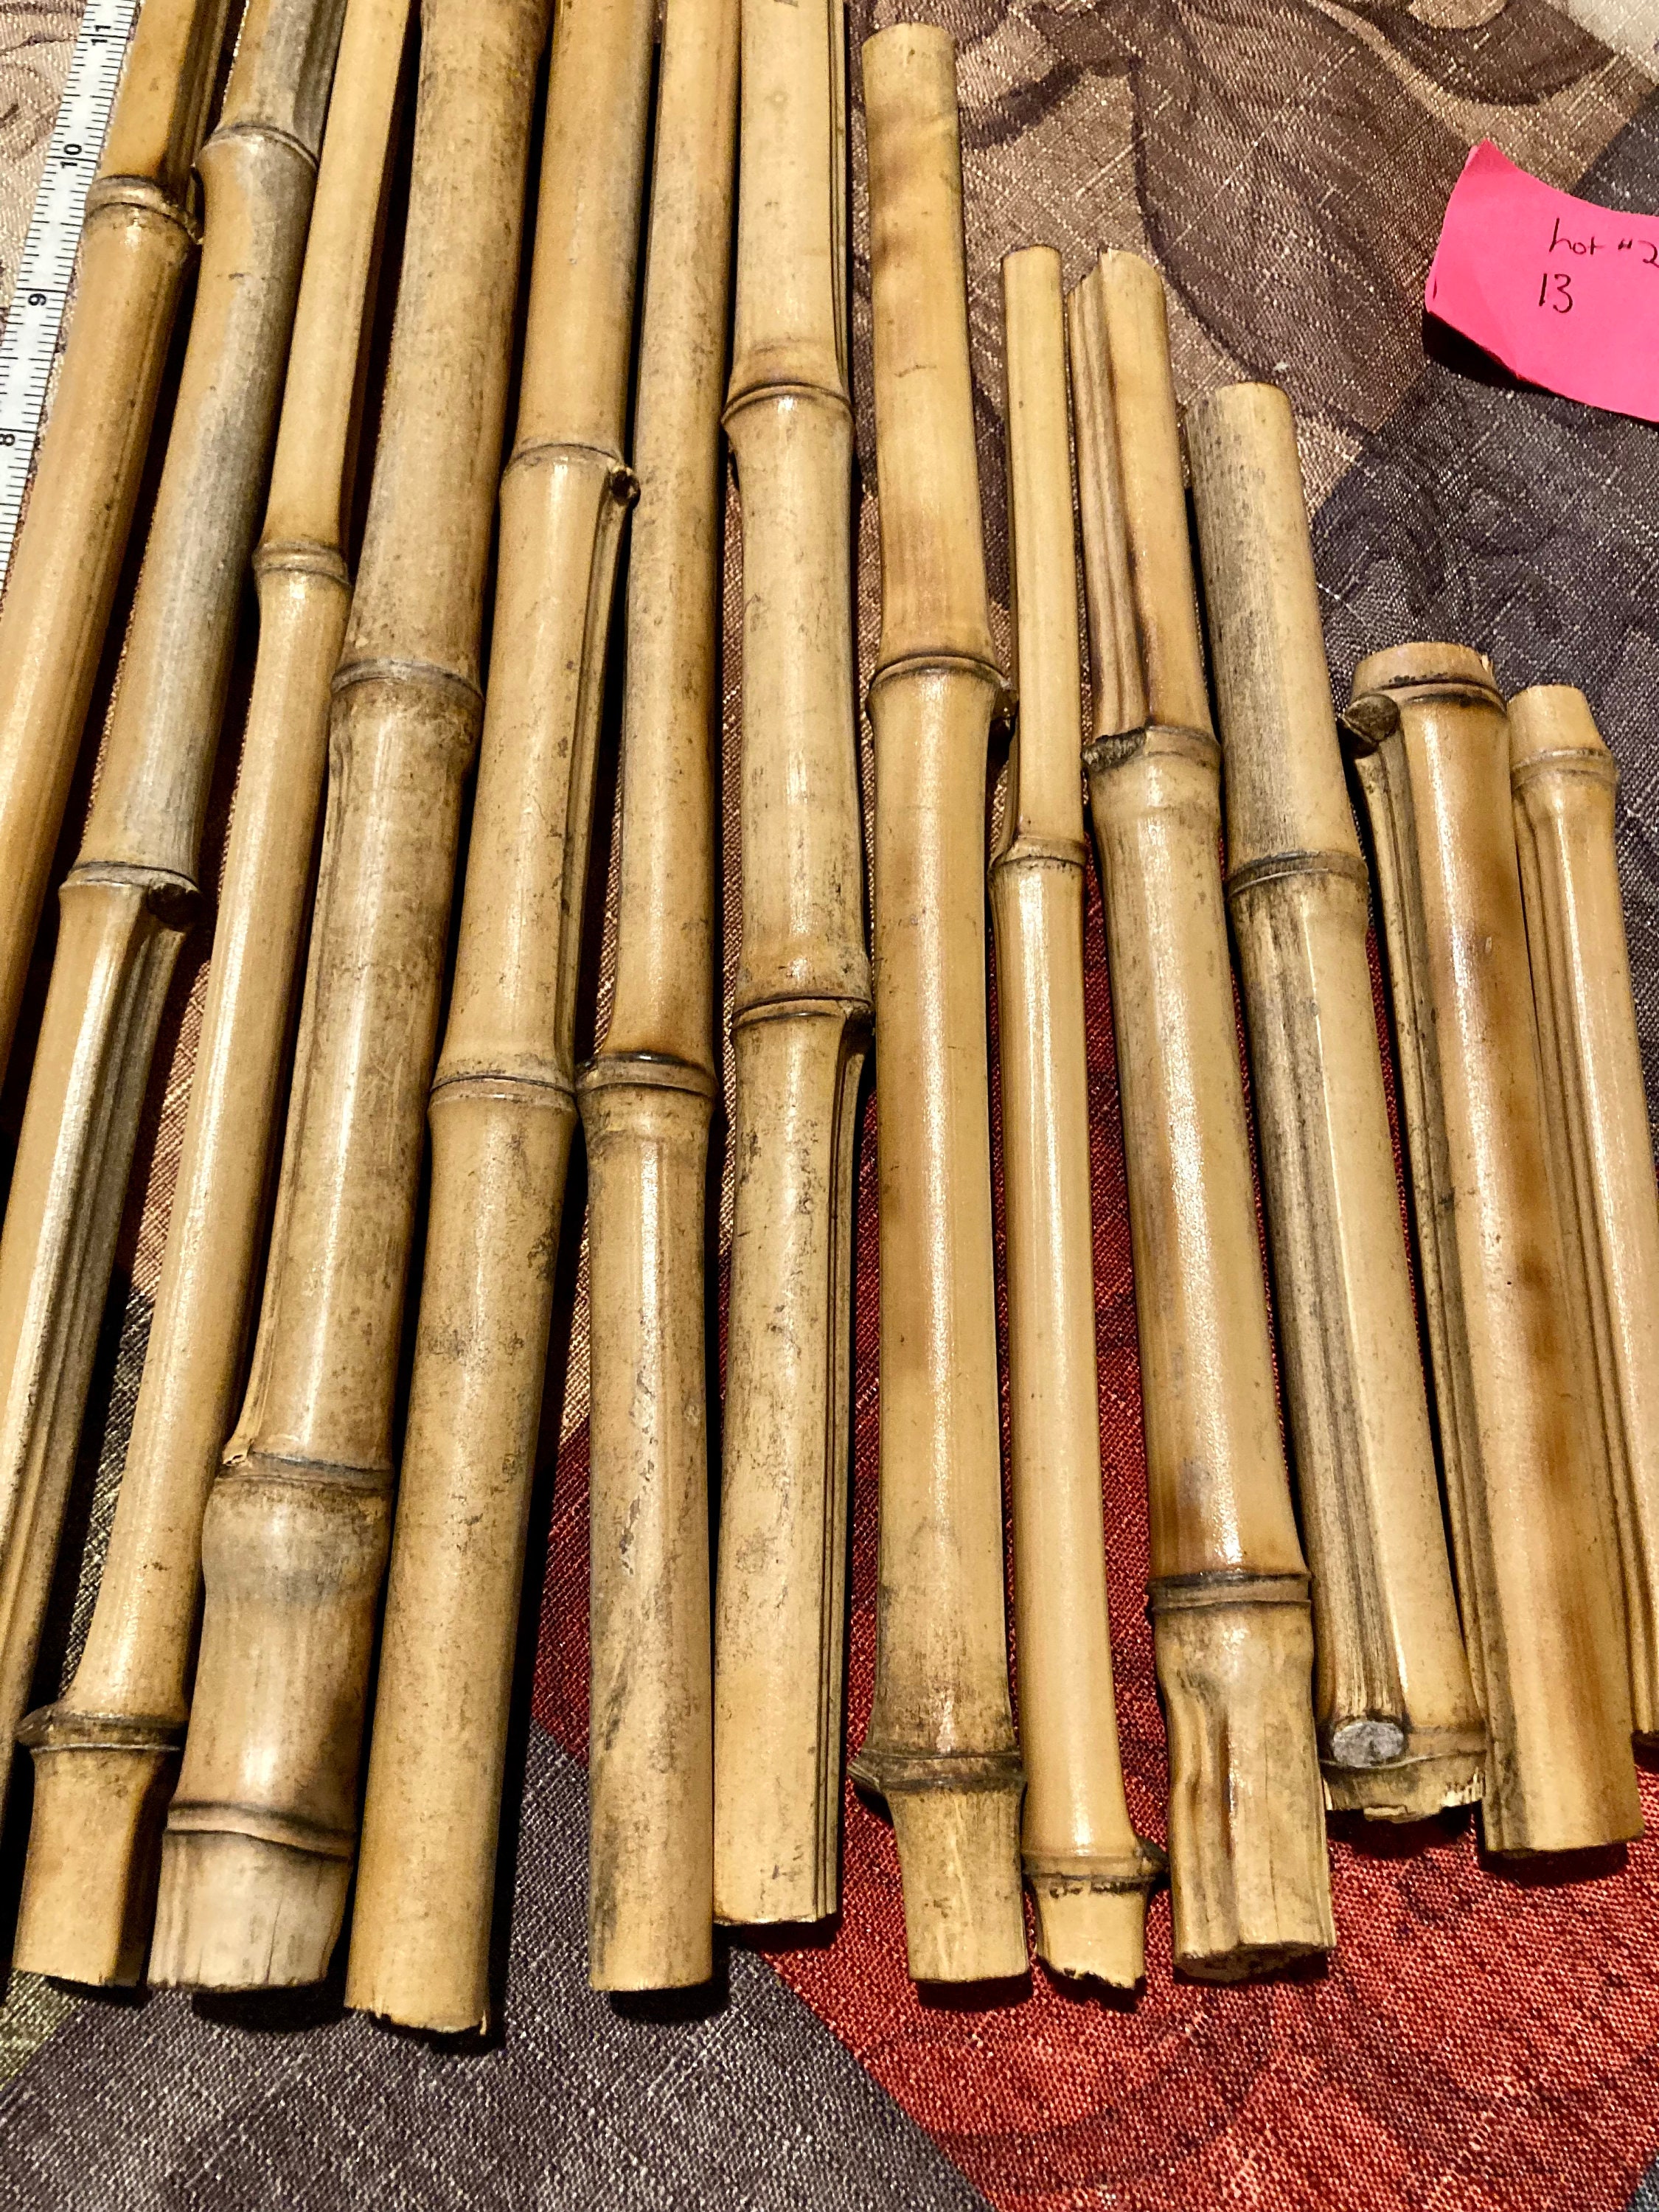 iA Crafts Bamboo Sticks, Bamboo Straws, Bamboo Stakes Craft Supplies, for Crafts and DIY, Natural Bamboo Color, 5.7 5.9 Long and 0.20-0.24 in Diameter